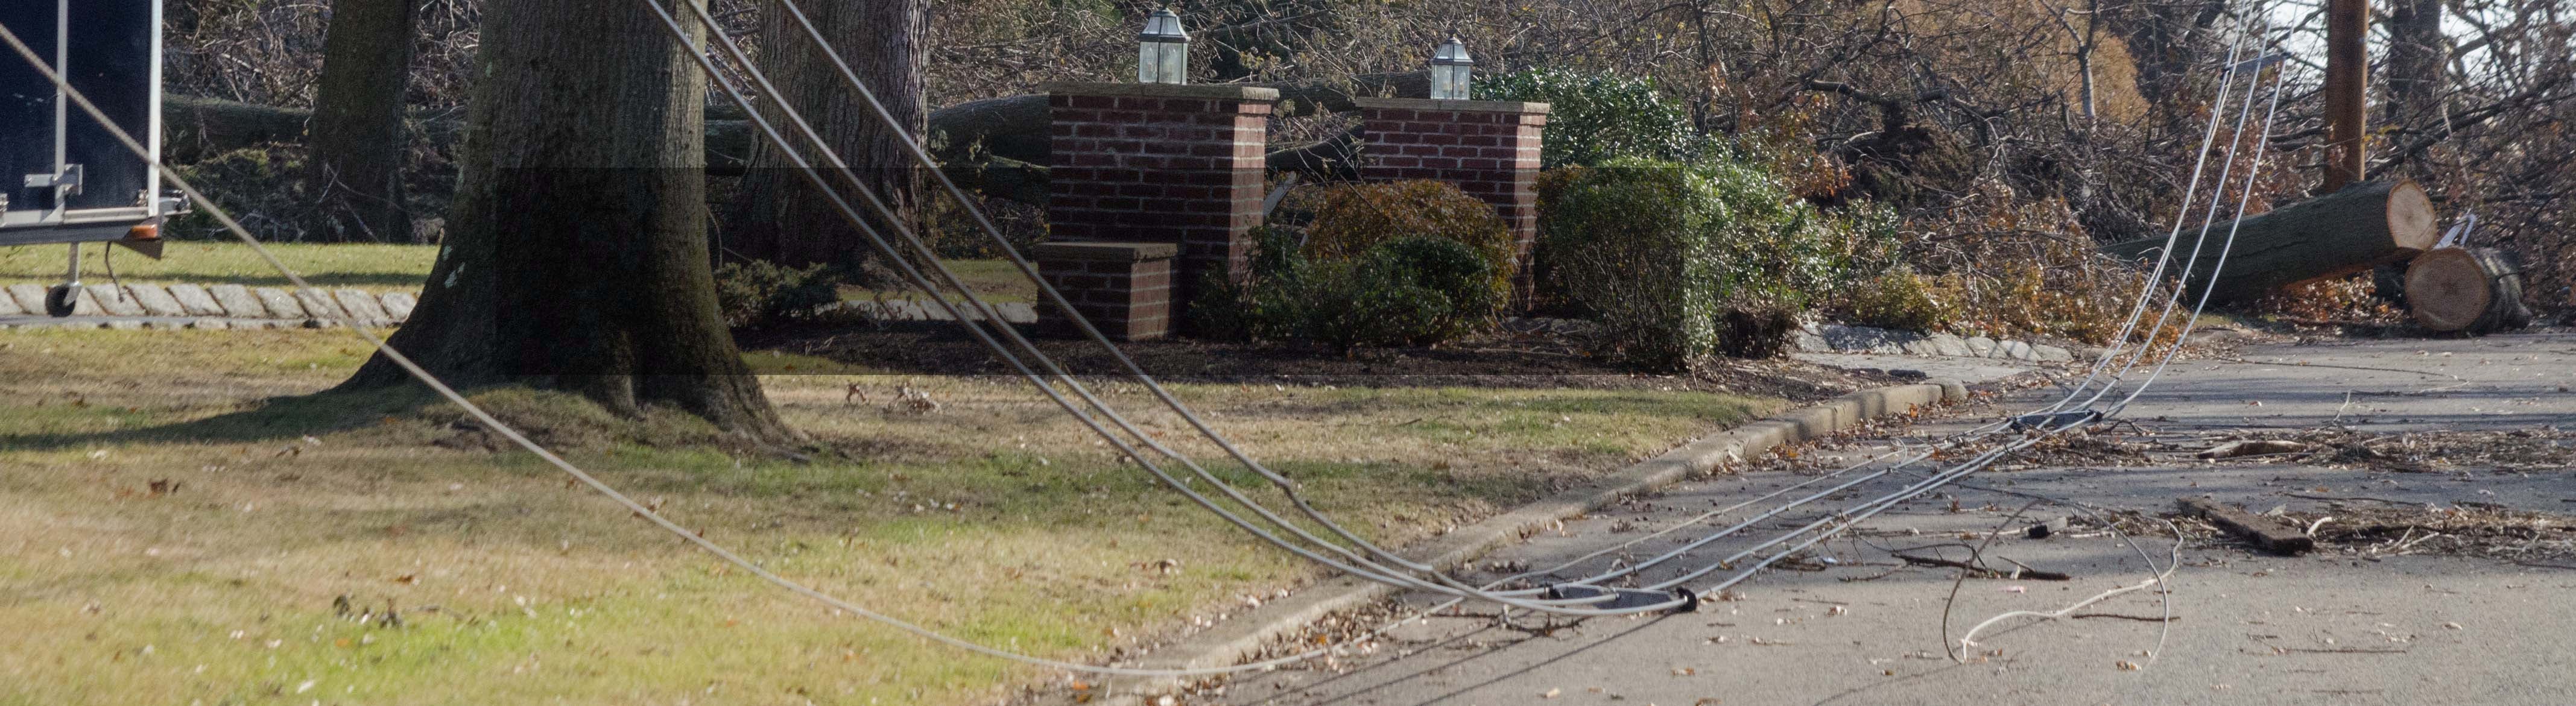 Are downed power lines always dead? No!